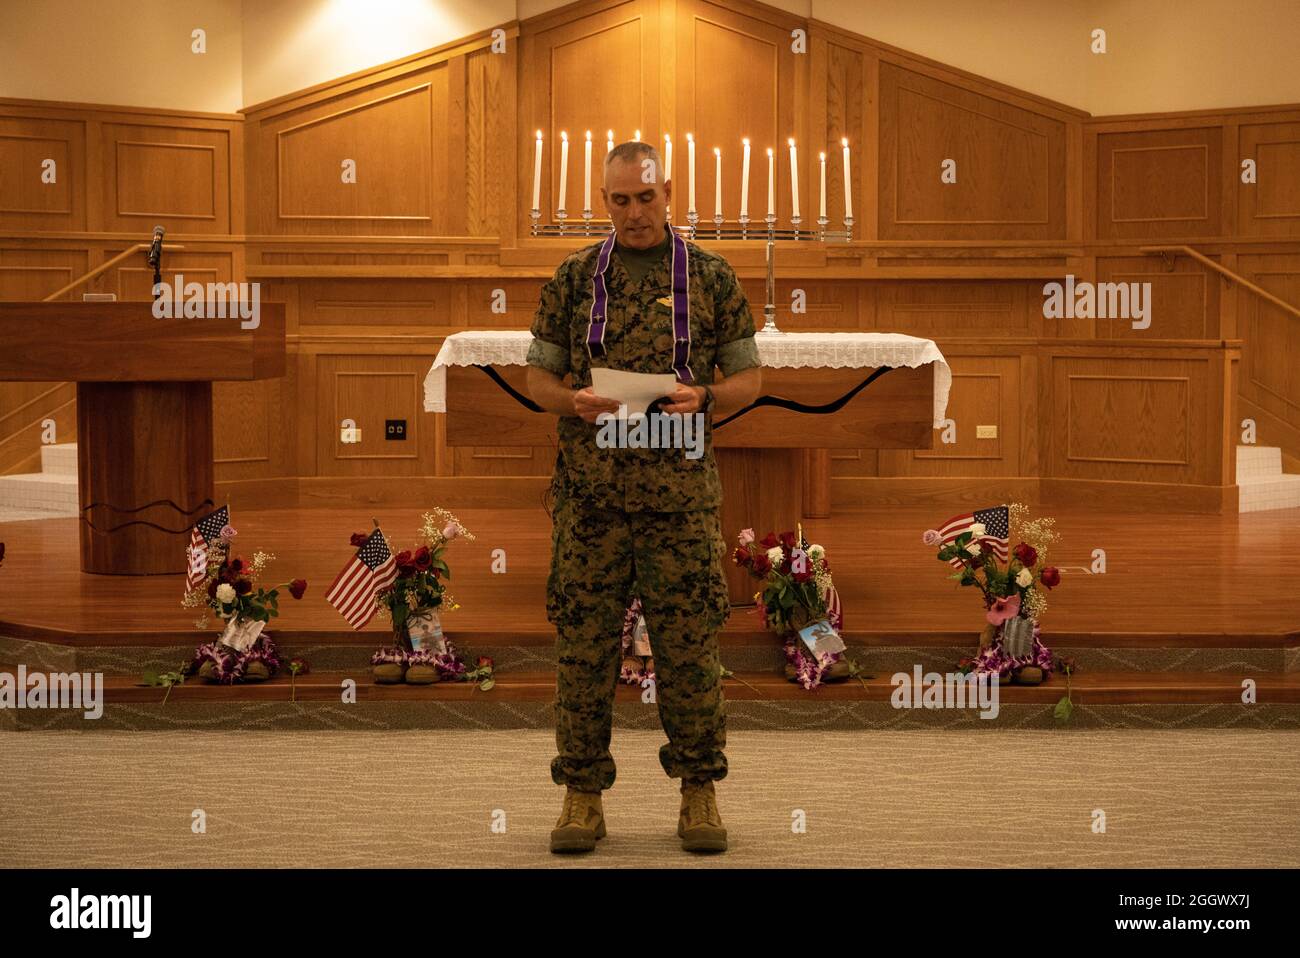 U.S. Navy Cmdr. Edward M. Gorman, base chaplain, Marine Corps Base Hawaii, leads a memorial prayer service and candlelight vigil aboard MCBH, Aug. 29, 2021. The event was held to honor and remember the 13 service members who were killed in Afghanistan on Aug. 26, 2021. (U.S. Marine Corps photo by Gunnery Sgt. Orlando Perez) Stock Photo